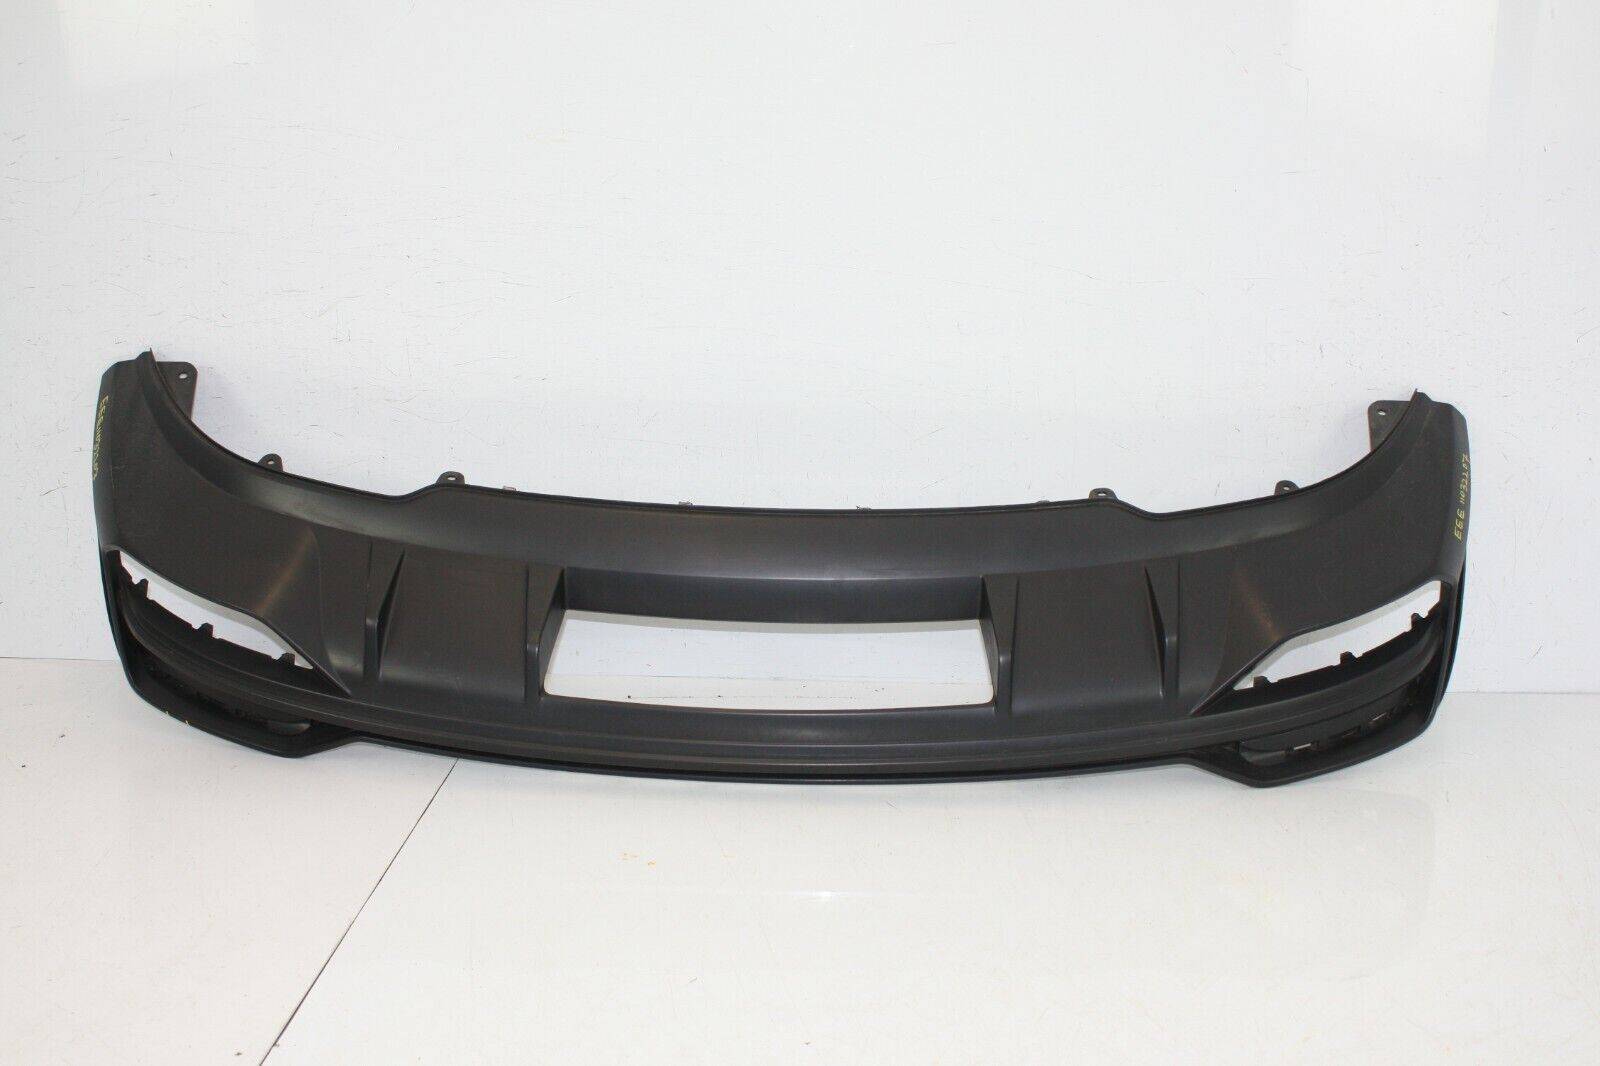 Audi Q3 S Line Rear Bumper Lower Section 2018 ON 83A807568B Genuine 175900094599